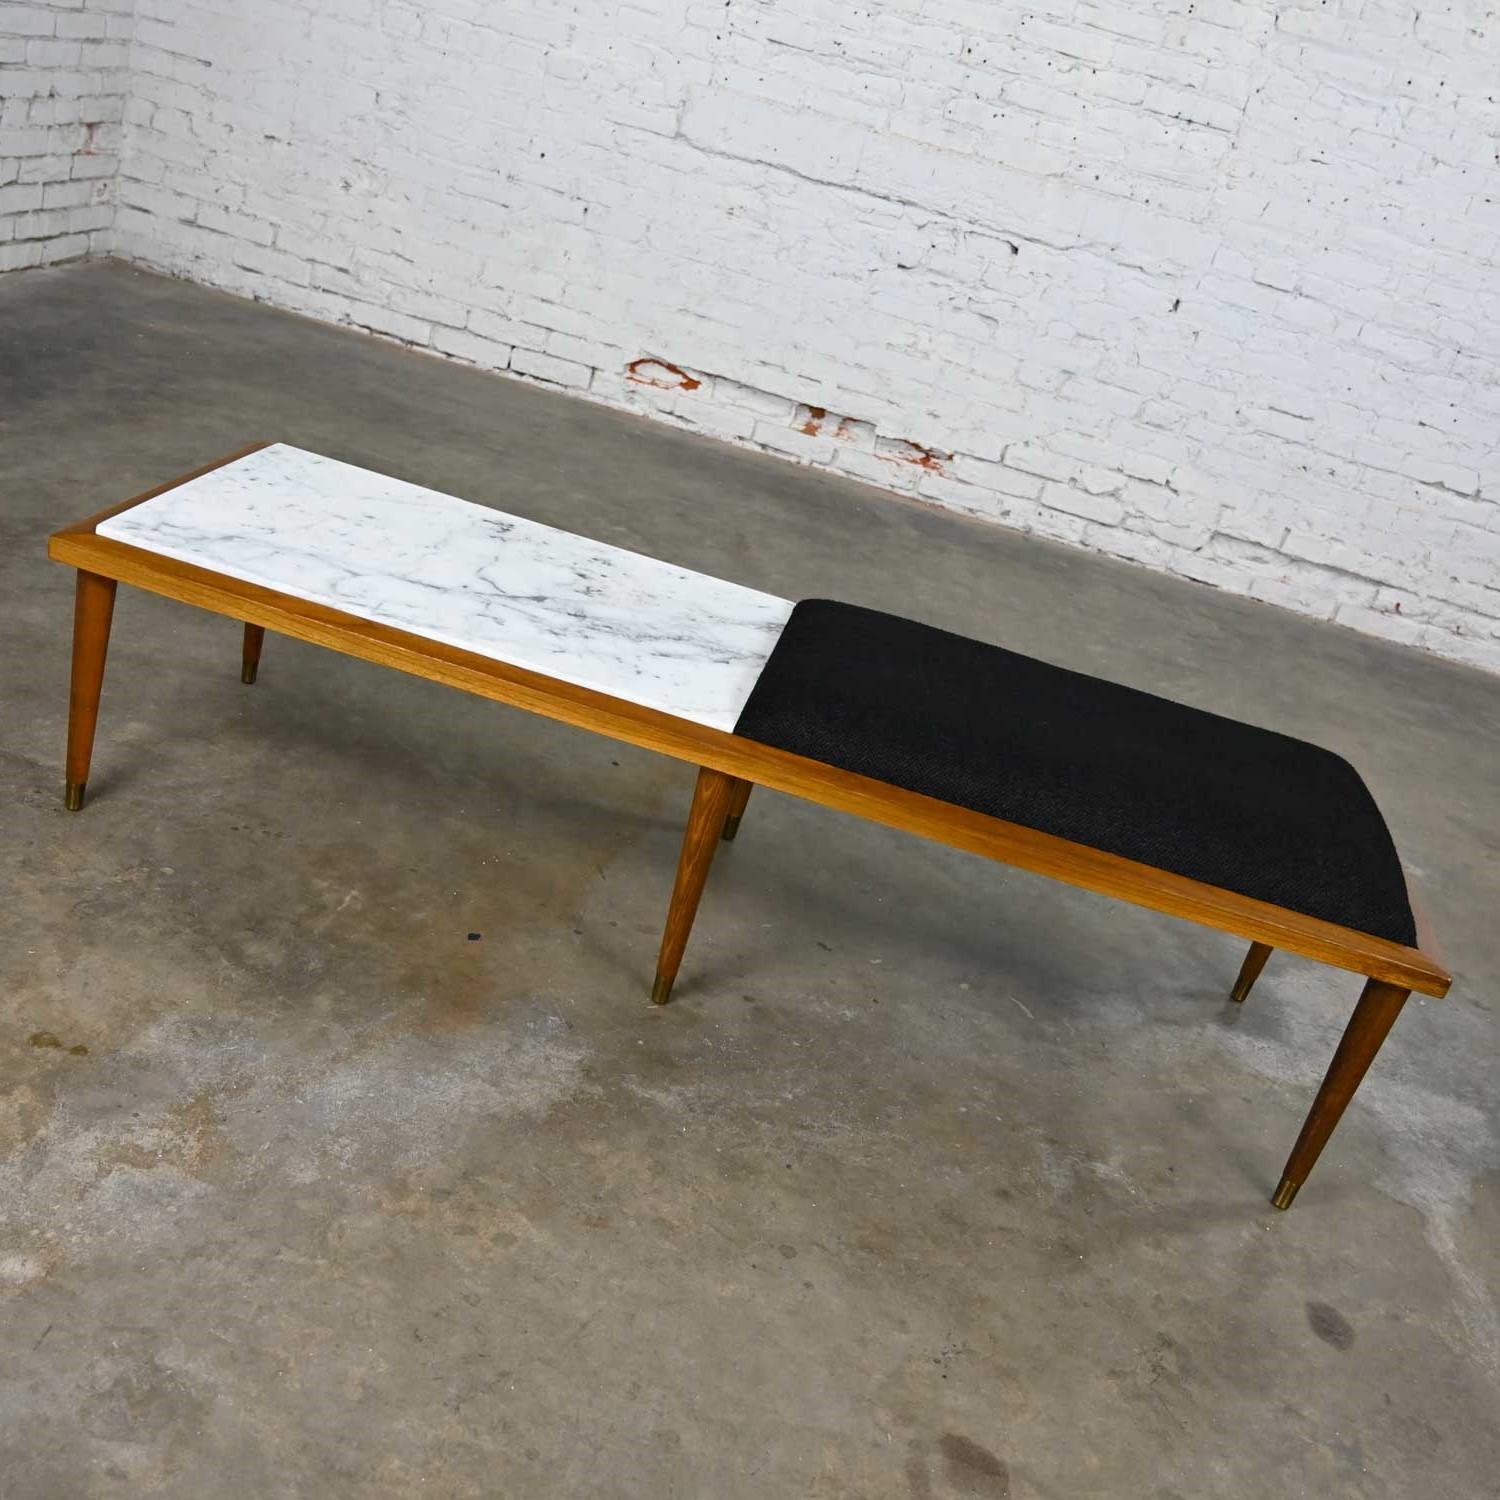 Handsome mid-century modern coffee table and bench combo half Italian Carrera marble & half black hopsacking fabric top with wood frame, tapered turned straight legs, & antiqued brass toned sabots. Beautiful condition, keeping in mind that this is